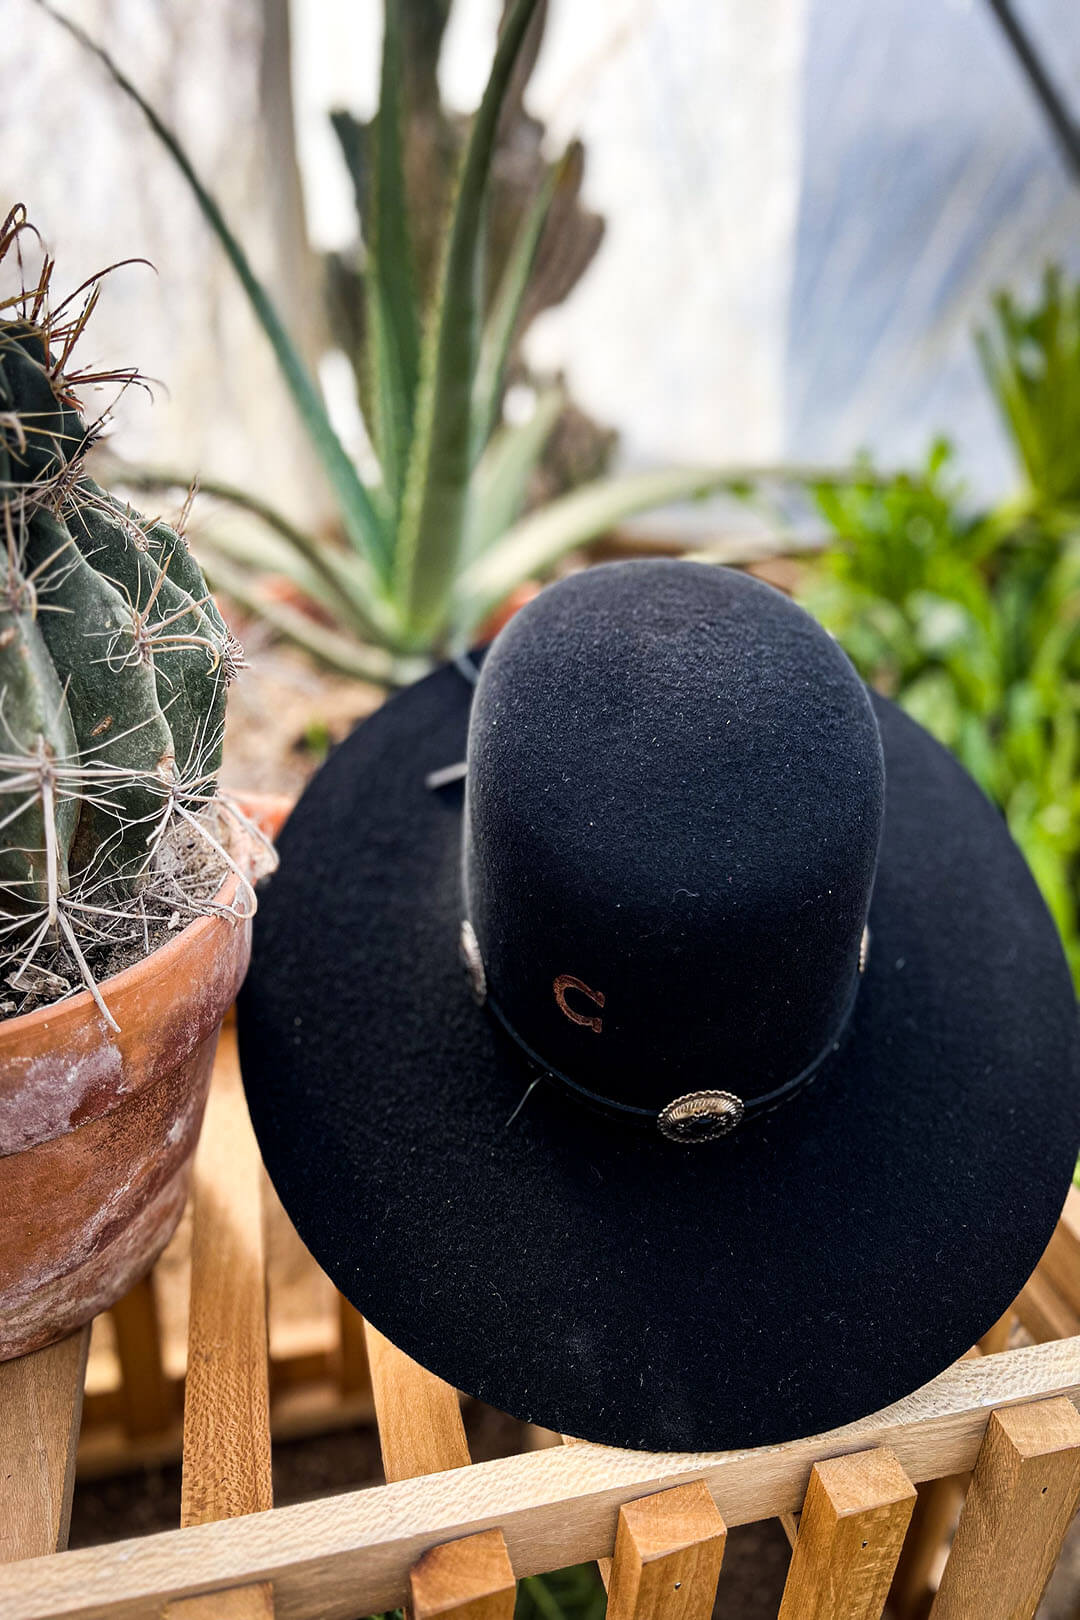 Picture of the stagecoach 07 black cowgirl hat by charlie 1 horse. The hat features a leather band with silver conchos around it. 